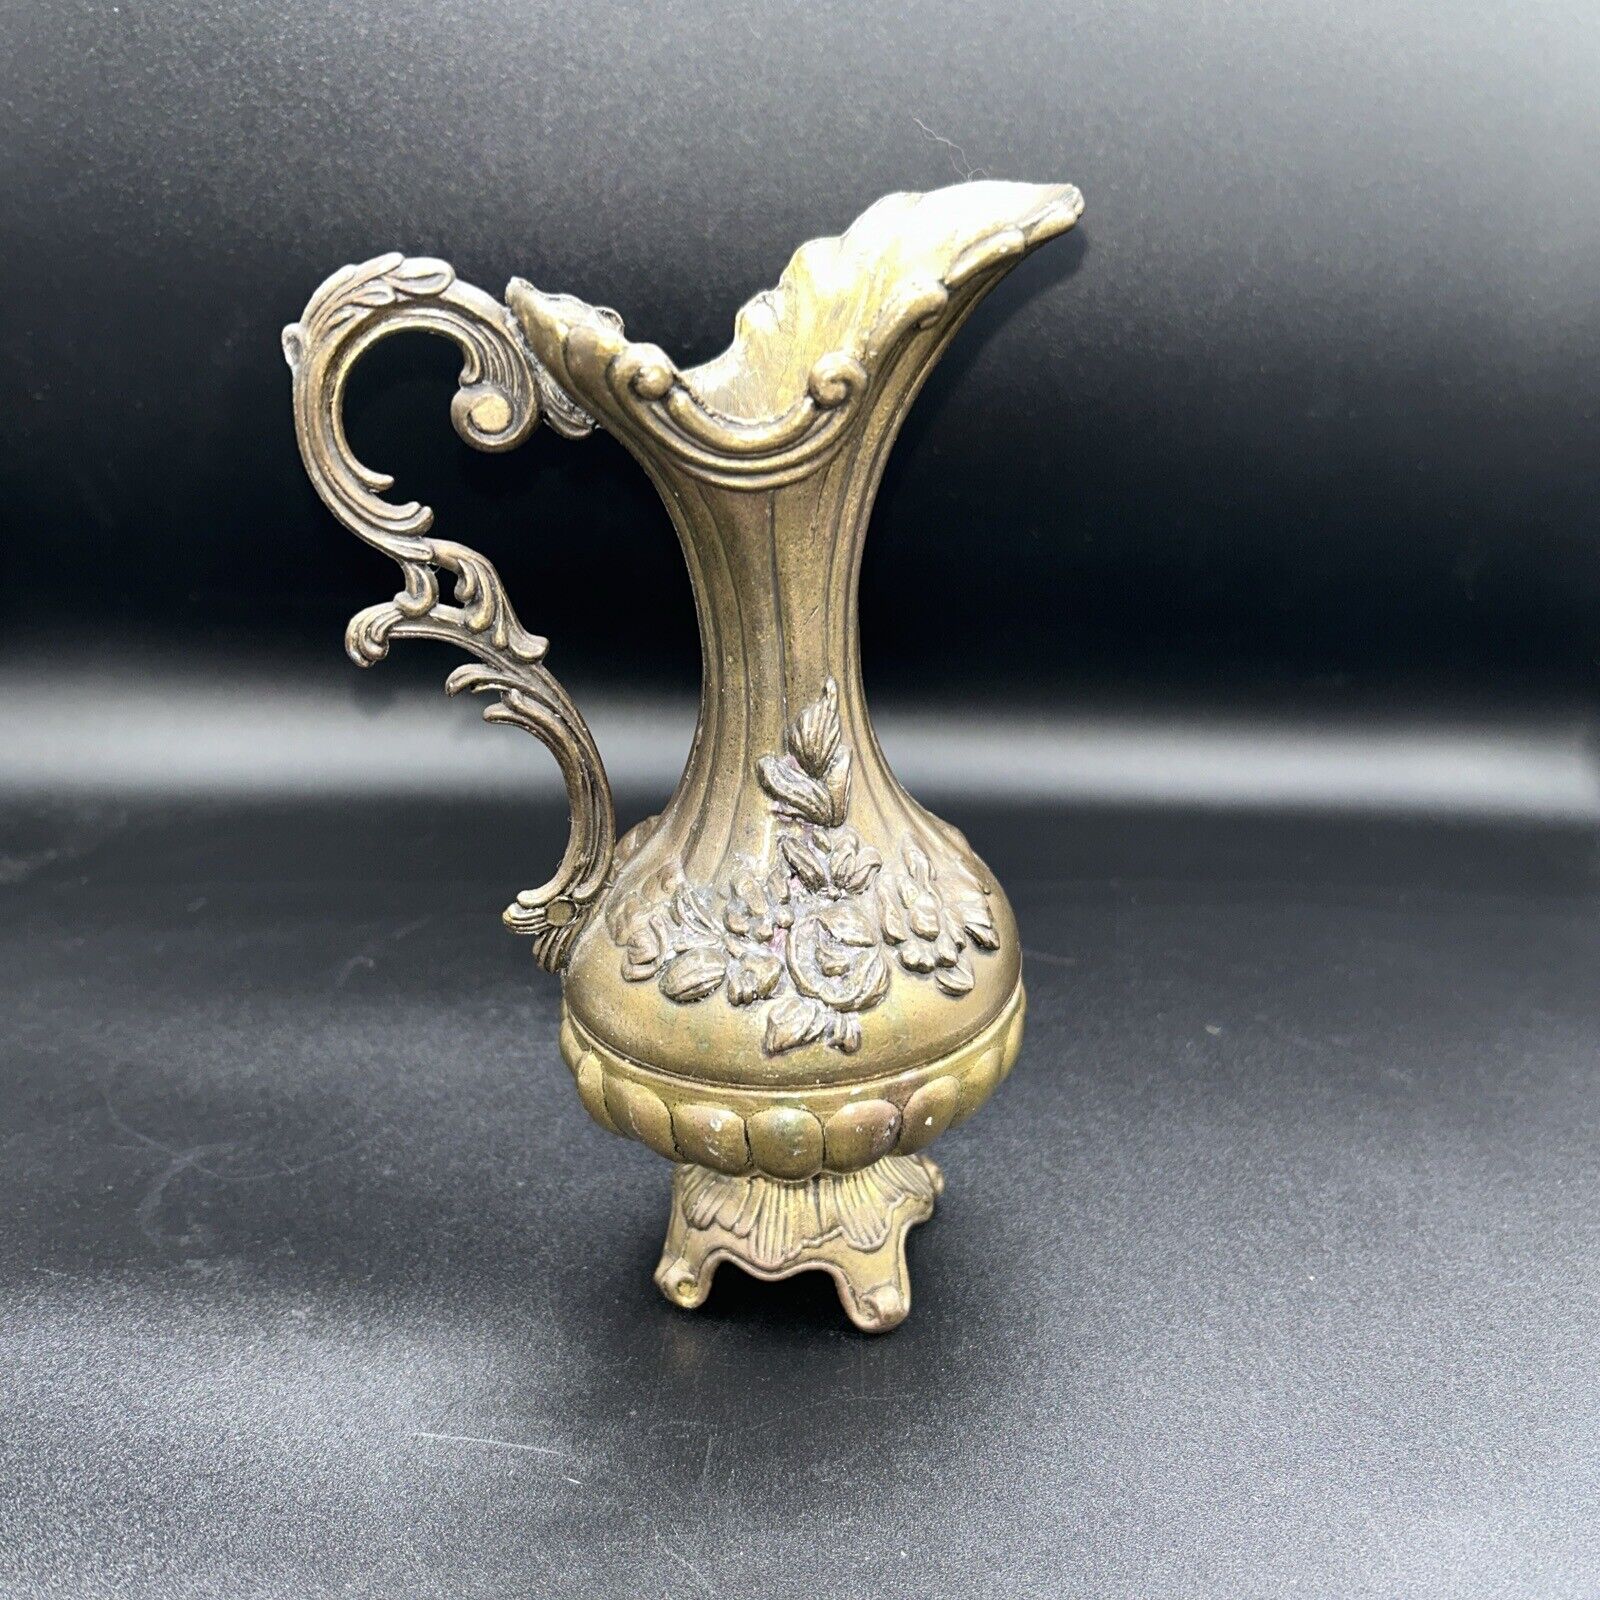 Italian Antique 1920s -1930s Peltrato Ornate Brass Plated Footed Pitcher Vase